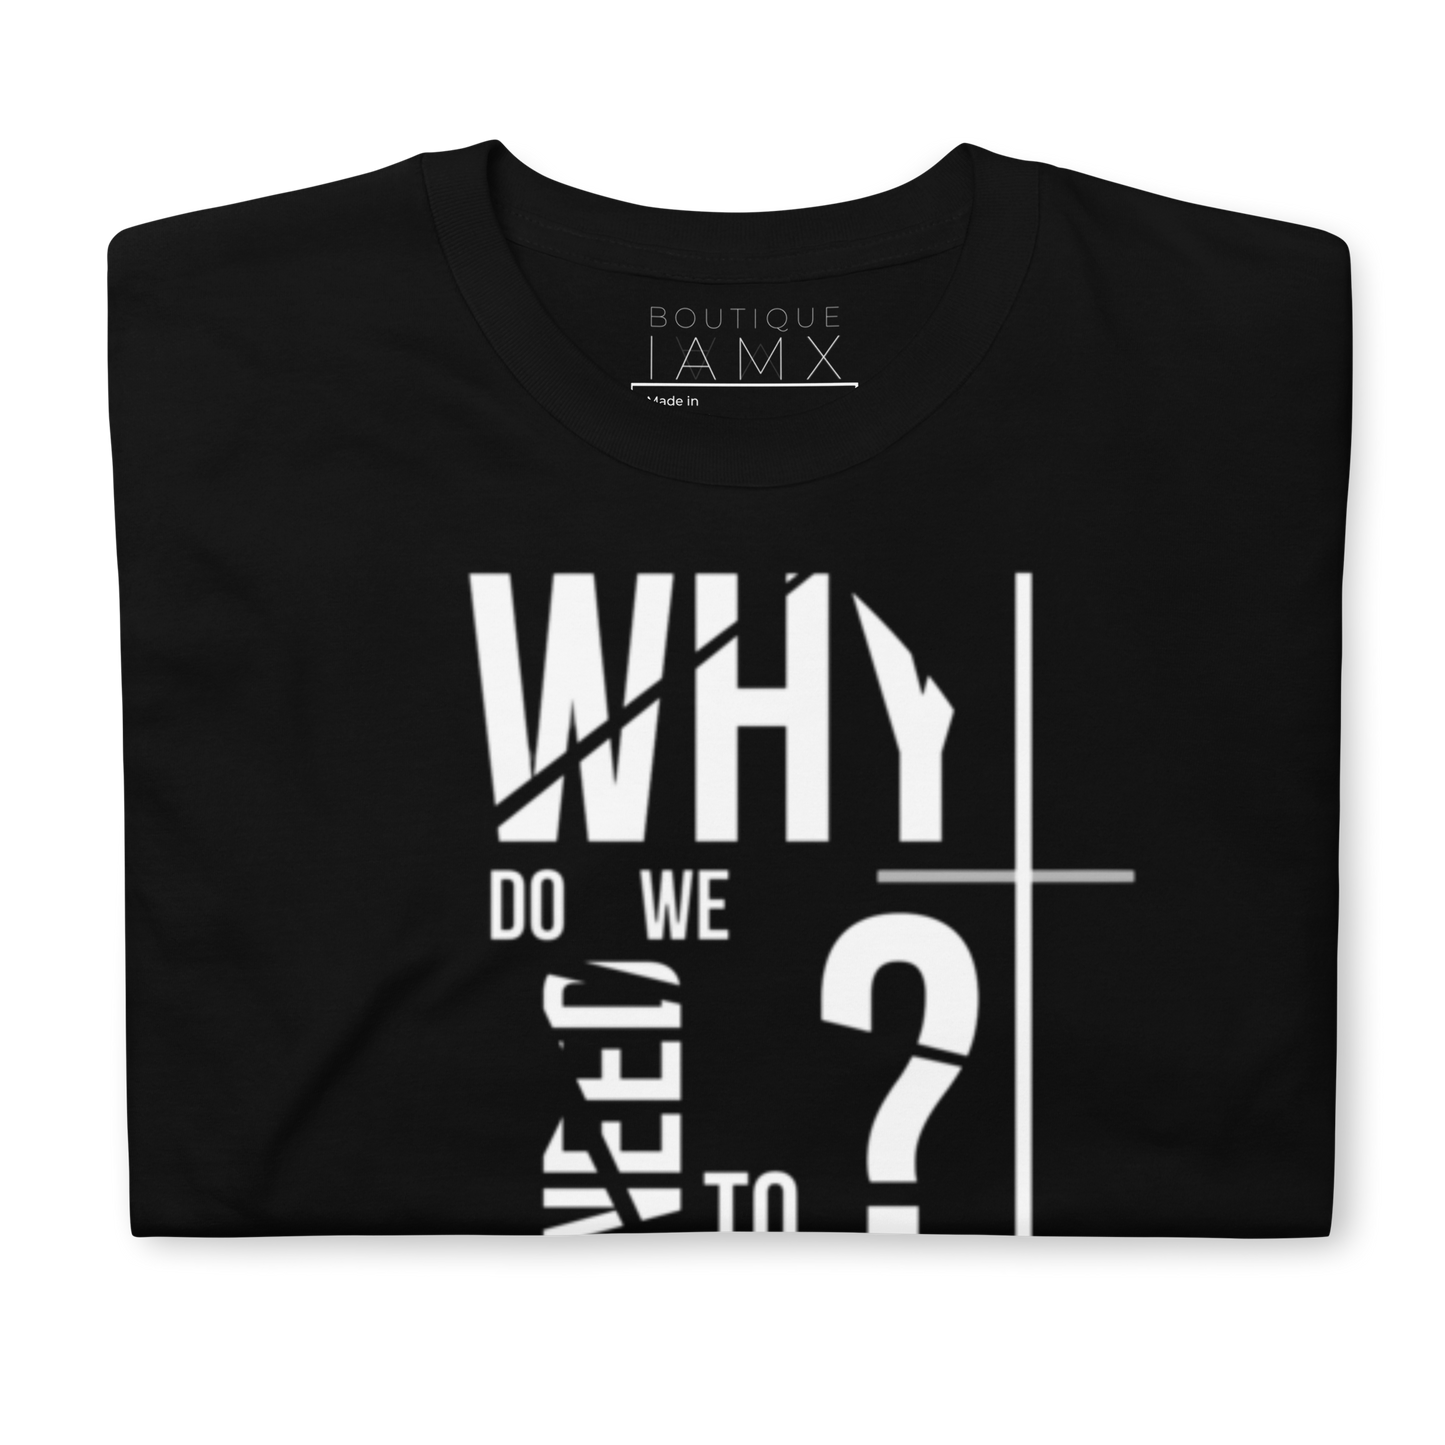 T-Shirt Unisex - Why Do We Need To Function?